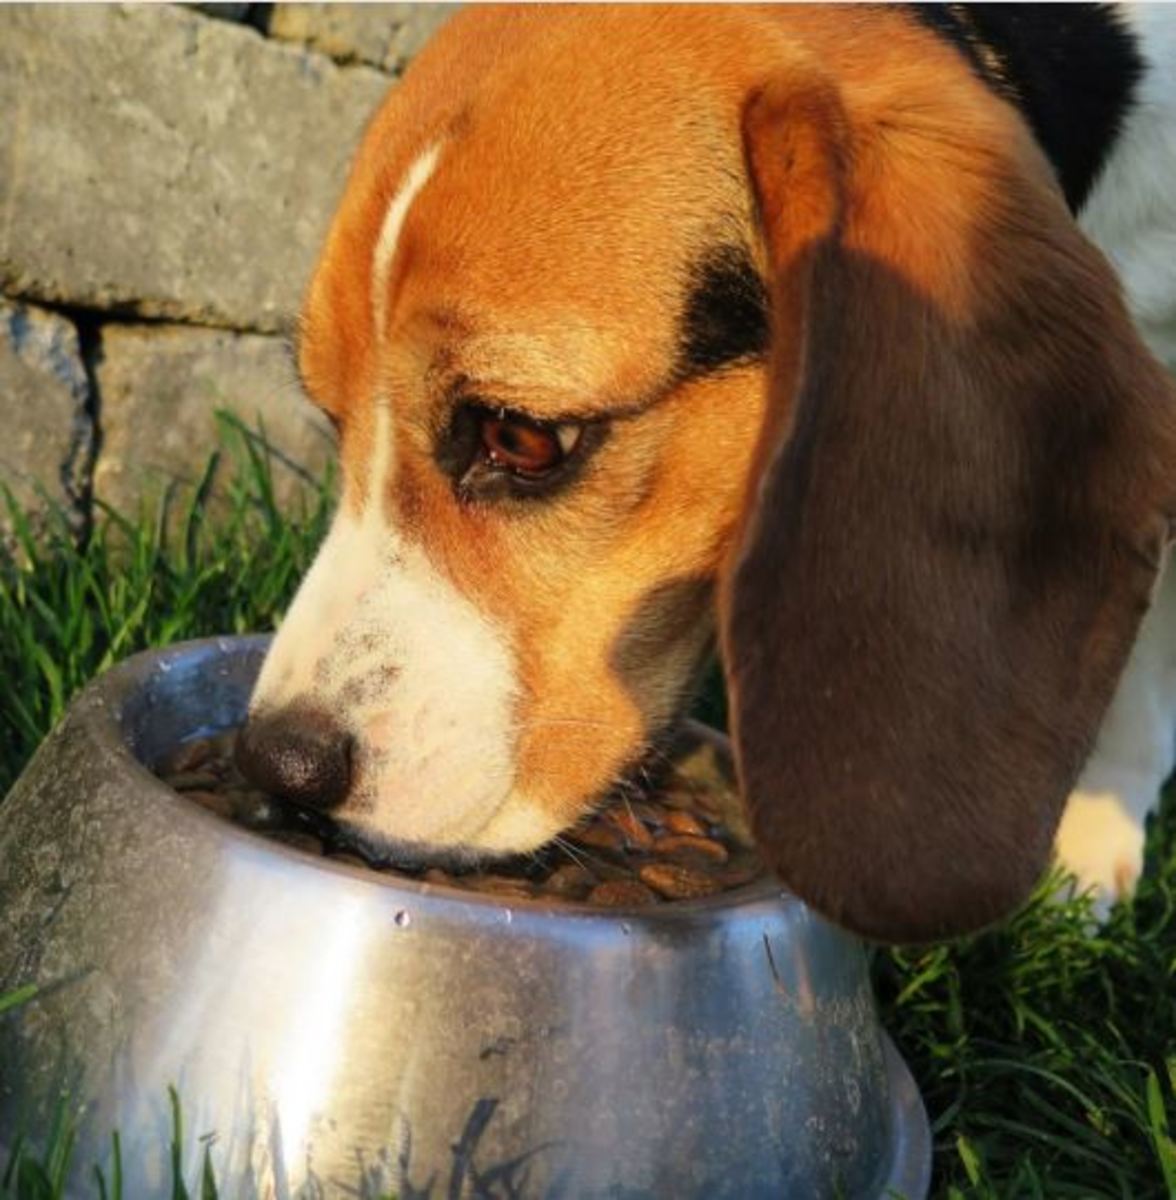 Any dietary changes can make dogs sick